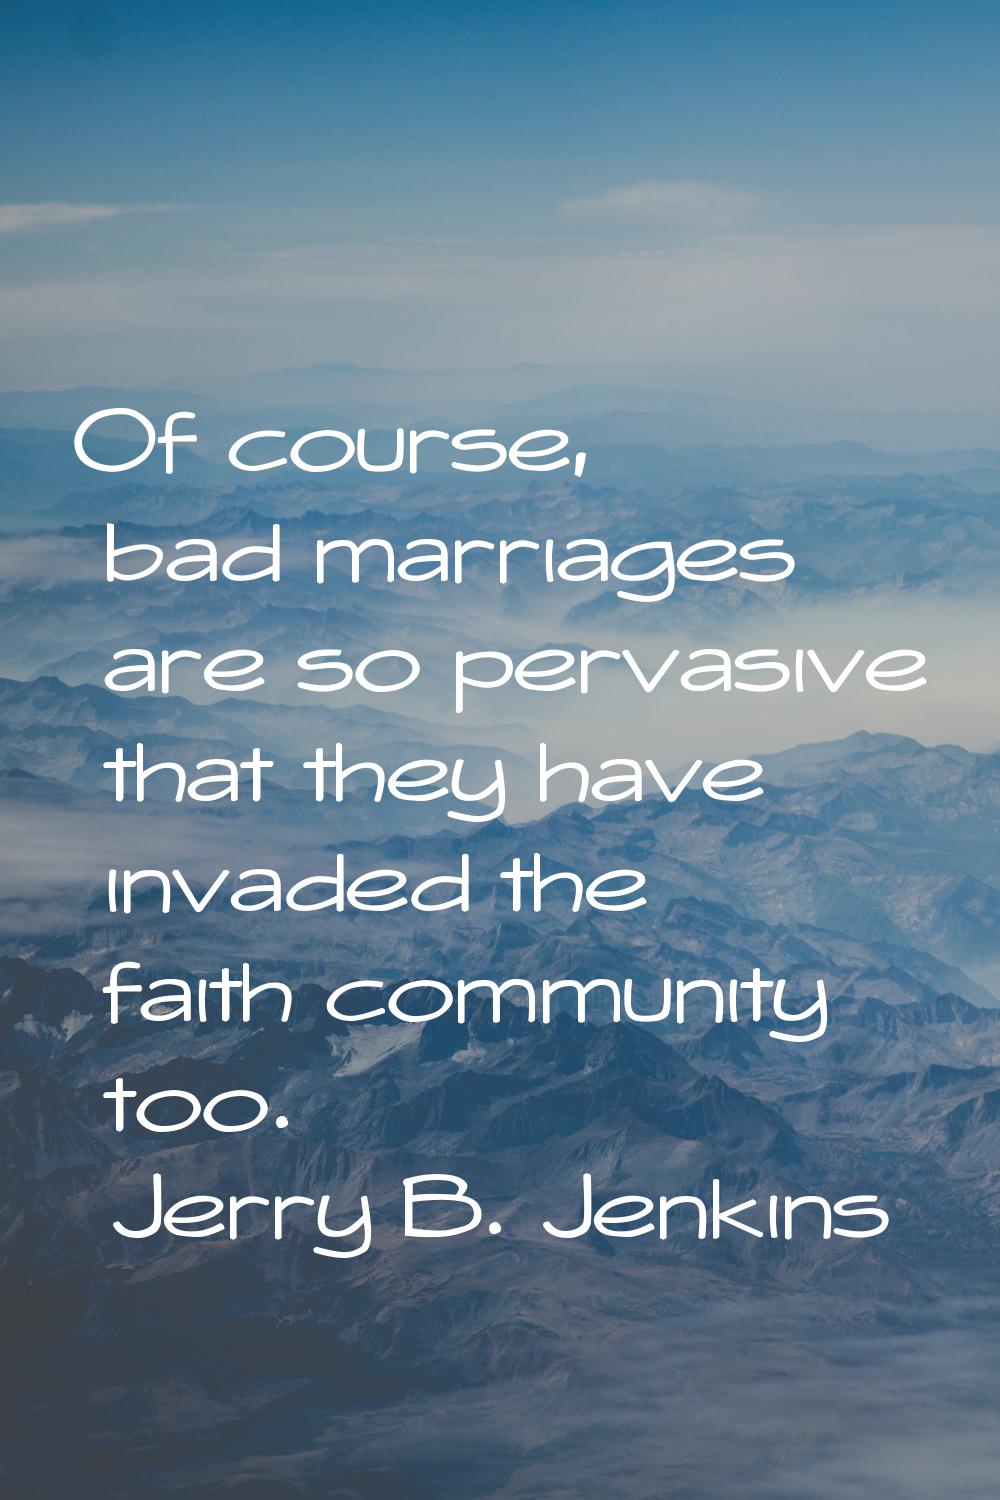 Of course, bad marriages are so pervasive that they have invaded the faith community too.